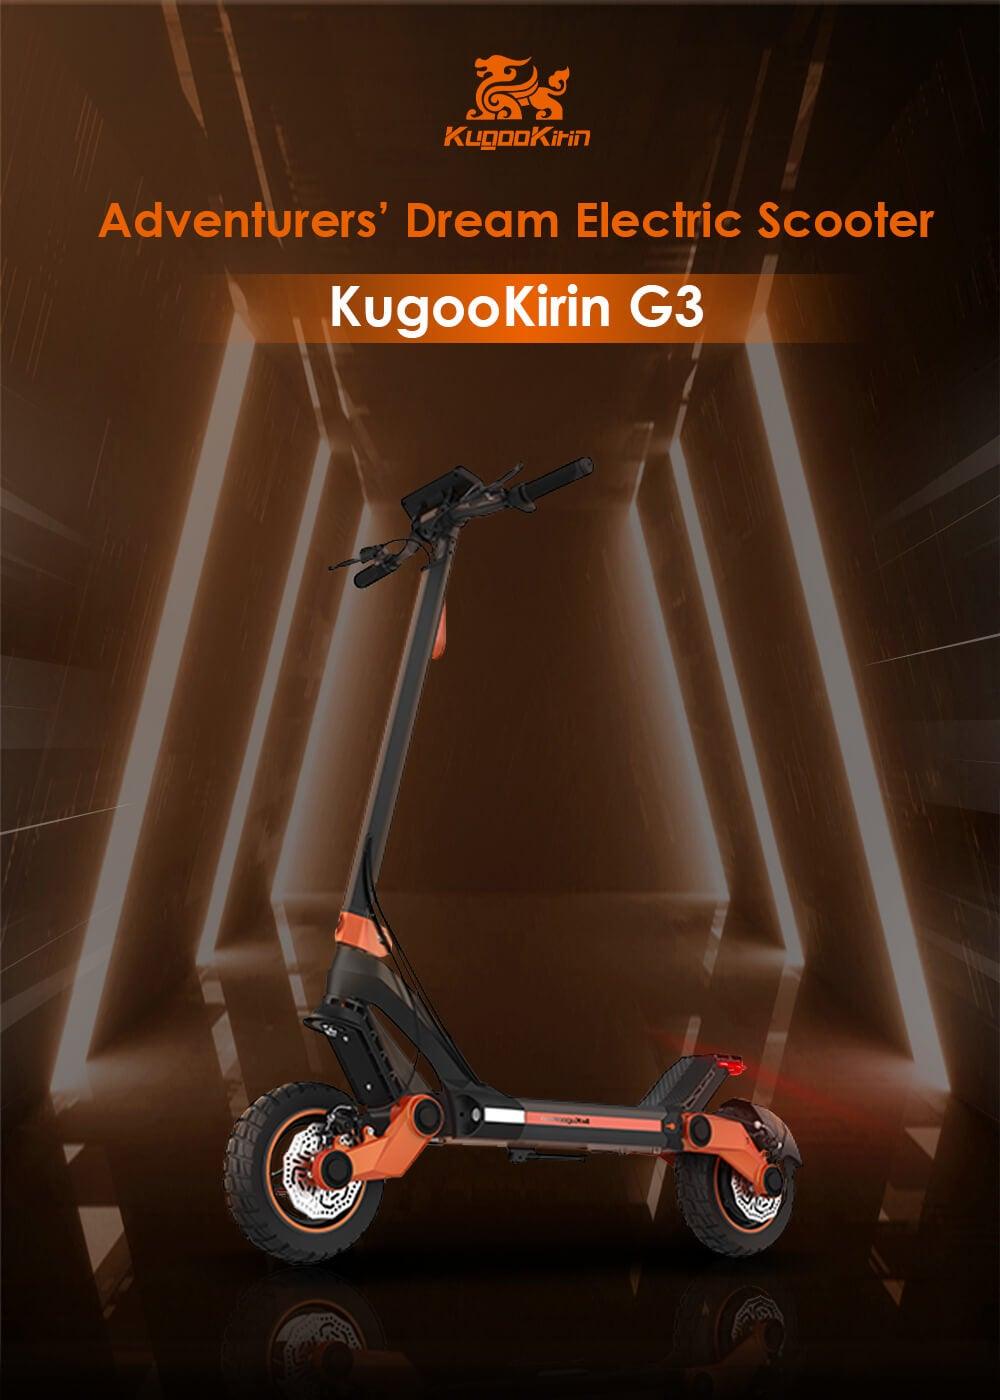 Kugoo Kirin G3 Adventurers Electric Scooter-2022 Edition - Pogo Cycles available in cycle to work